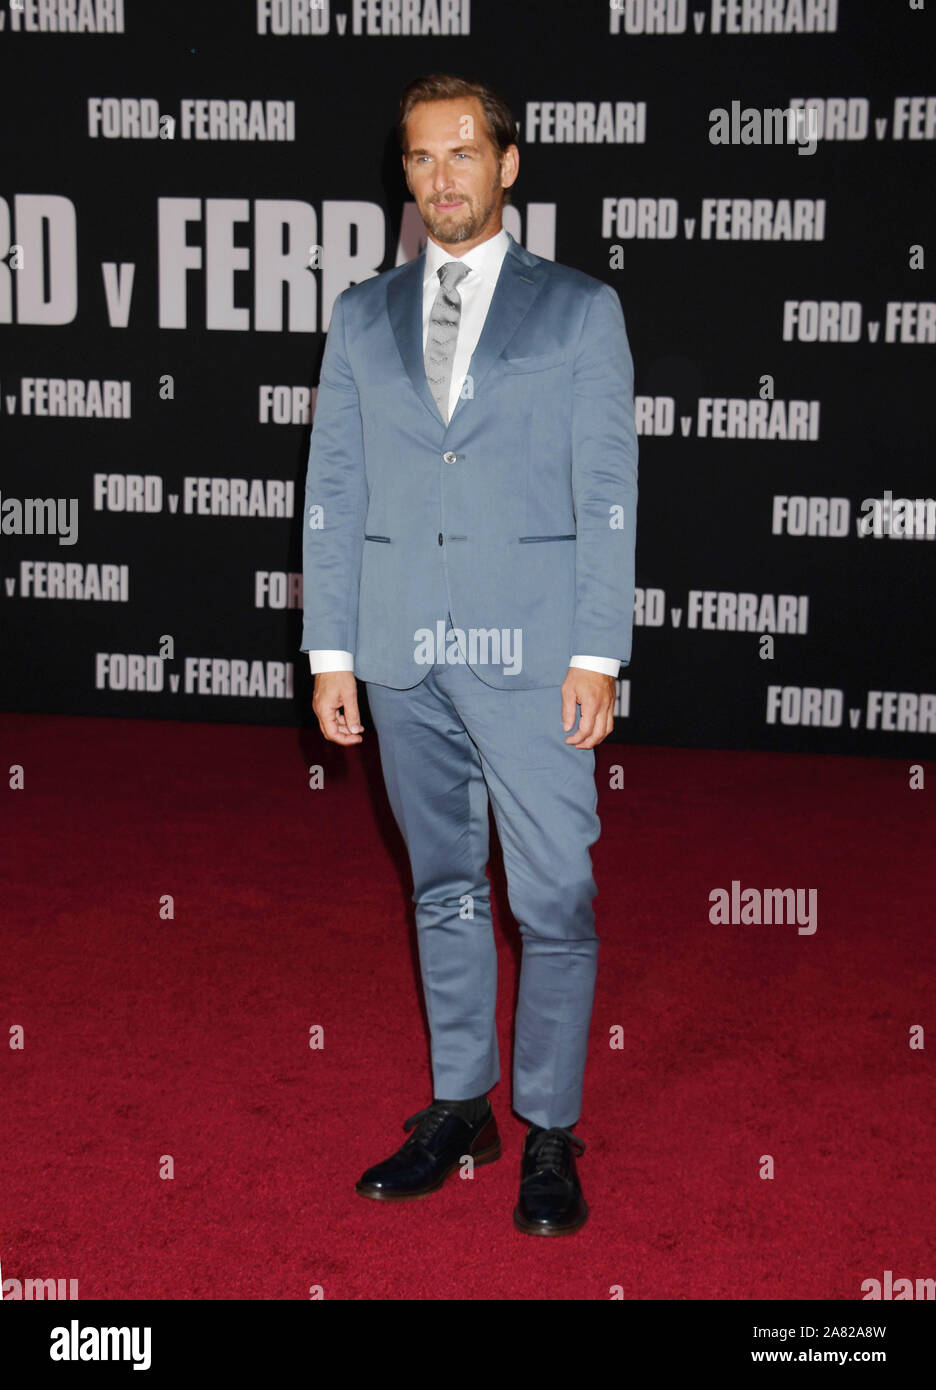 HOLLYWOOD, CA - NOVEMBER 04: Josh Lucas attends the Premiere of FOX's 'Ford V Ferrari' at TCL Chinese Theatre on November 04, 2019 in Hollywood, California. Stock Photo